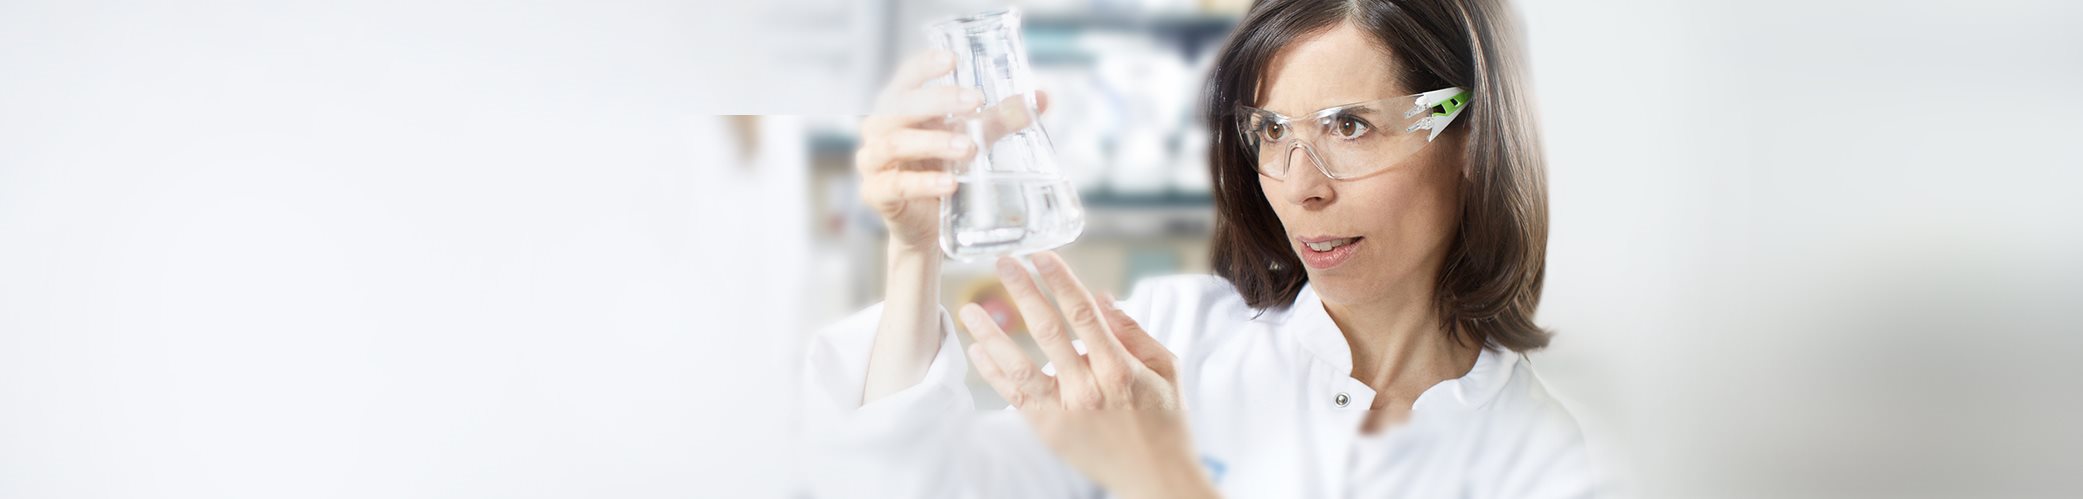 View of a female model wearing protective eyewear and holding up a glass beaker in a lab type setting.